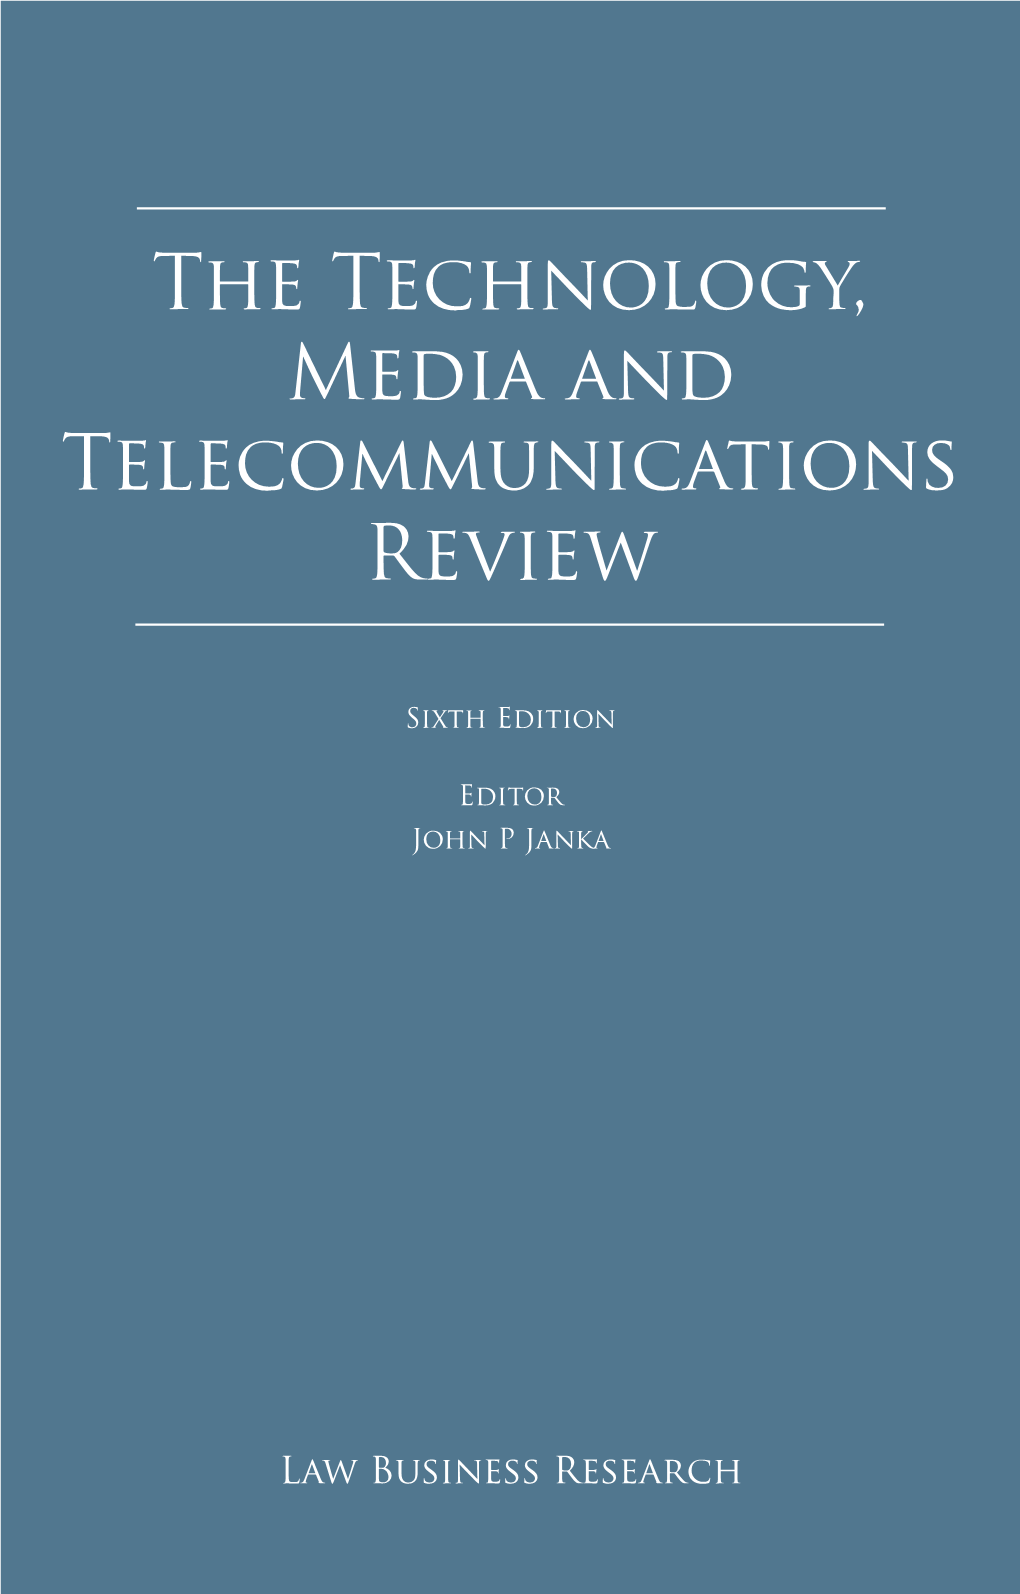 Technology, Media and Telecommunications Review – Japan